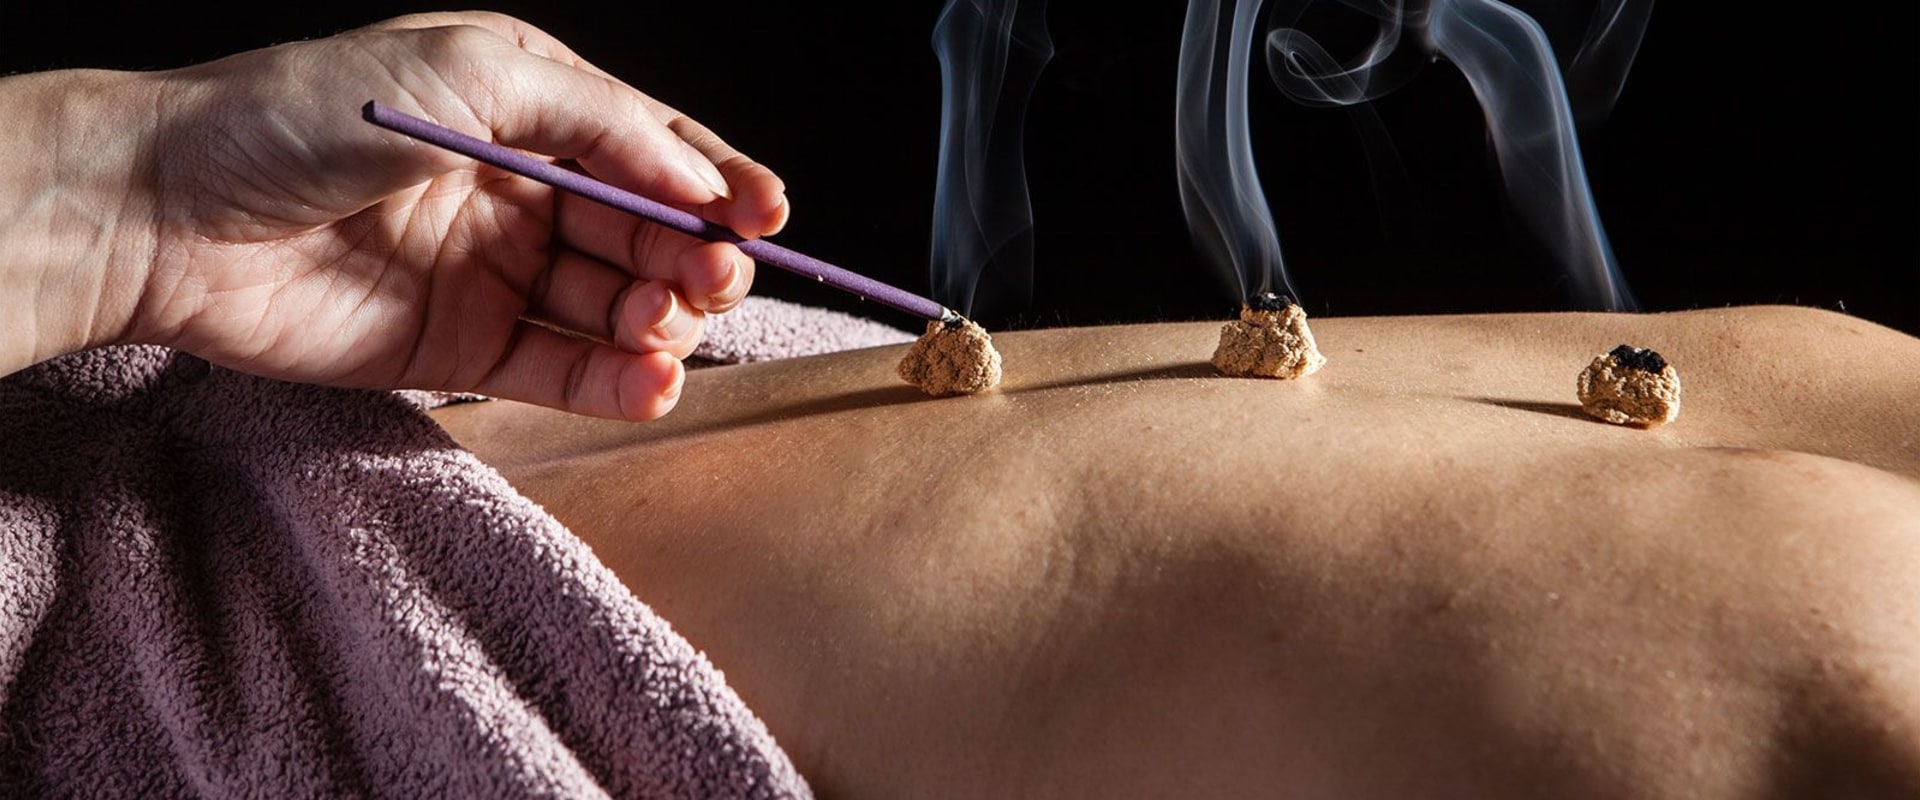 What is Moxibustion and How is it Different from Acupuncture?